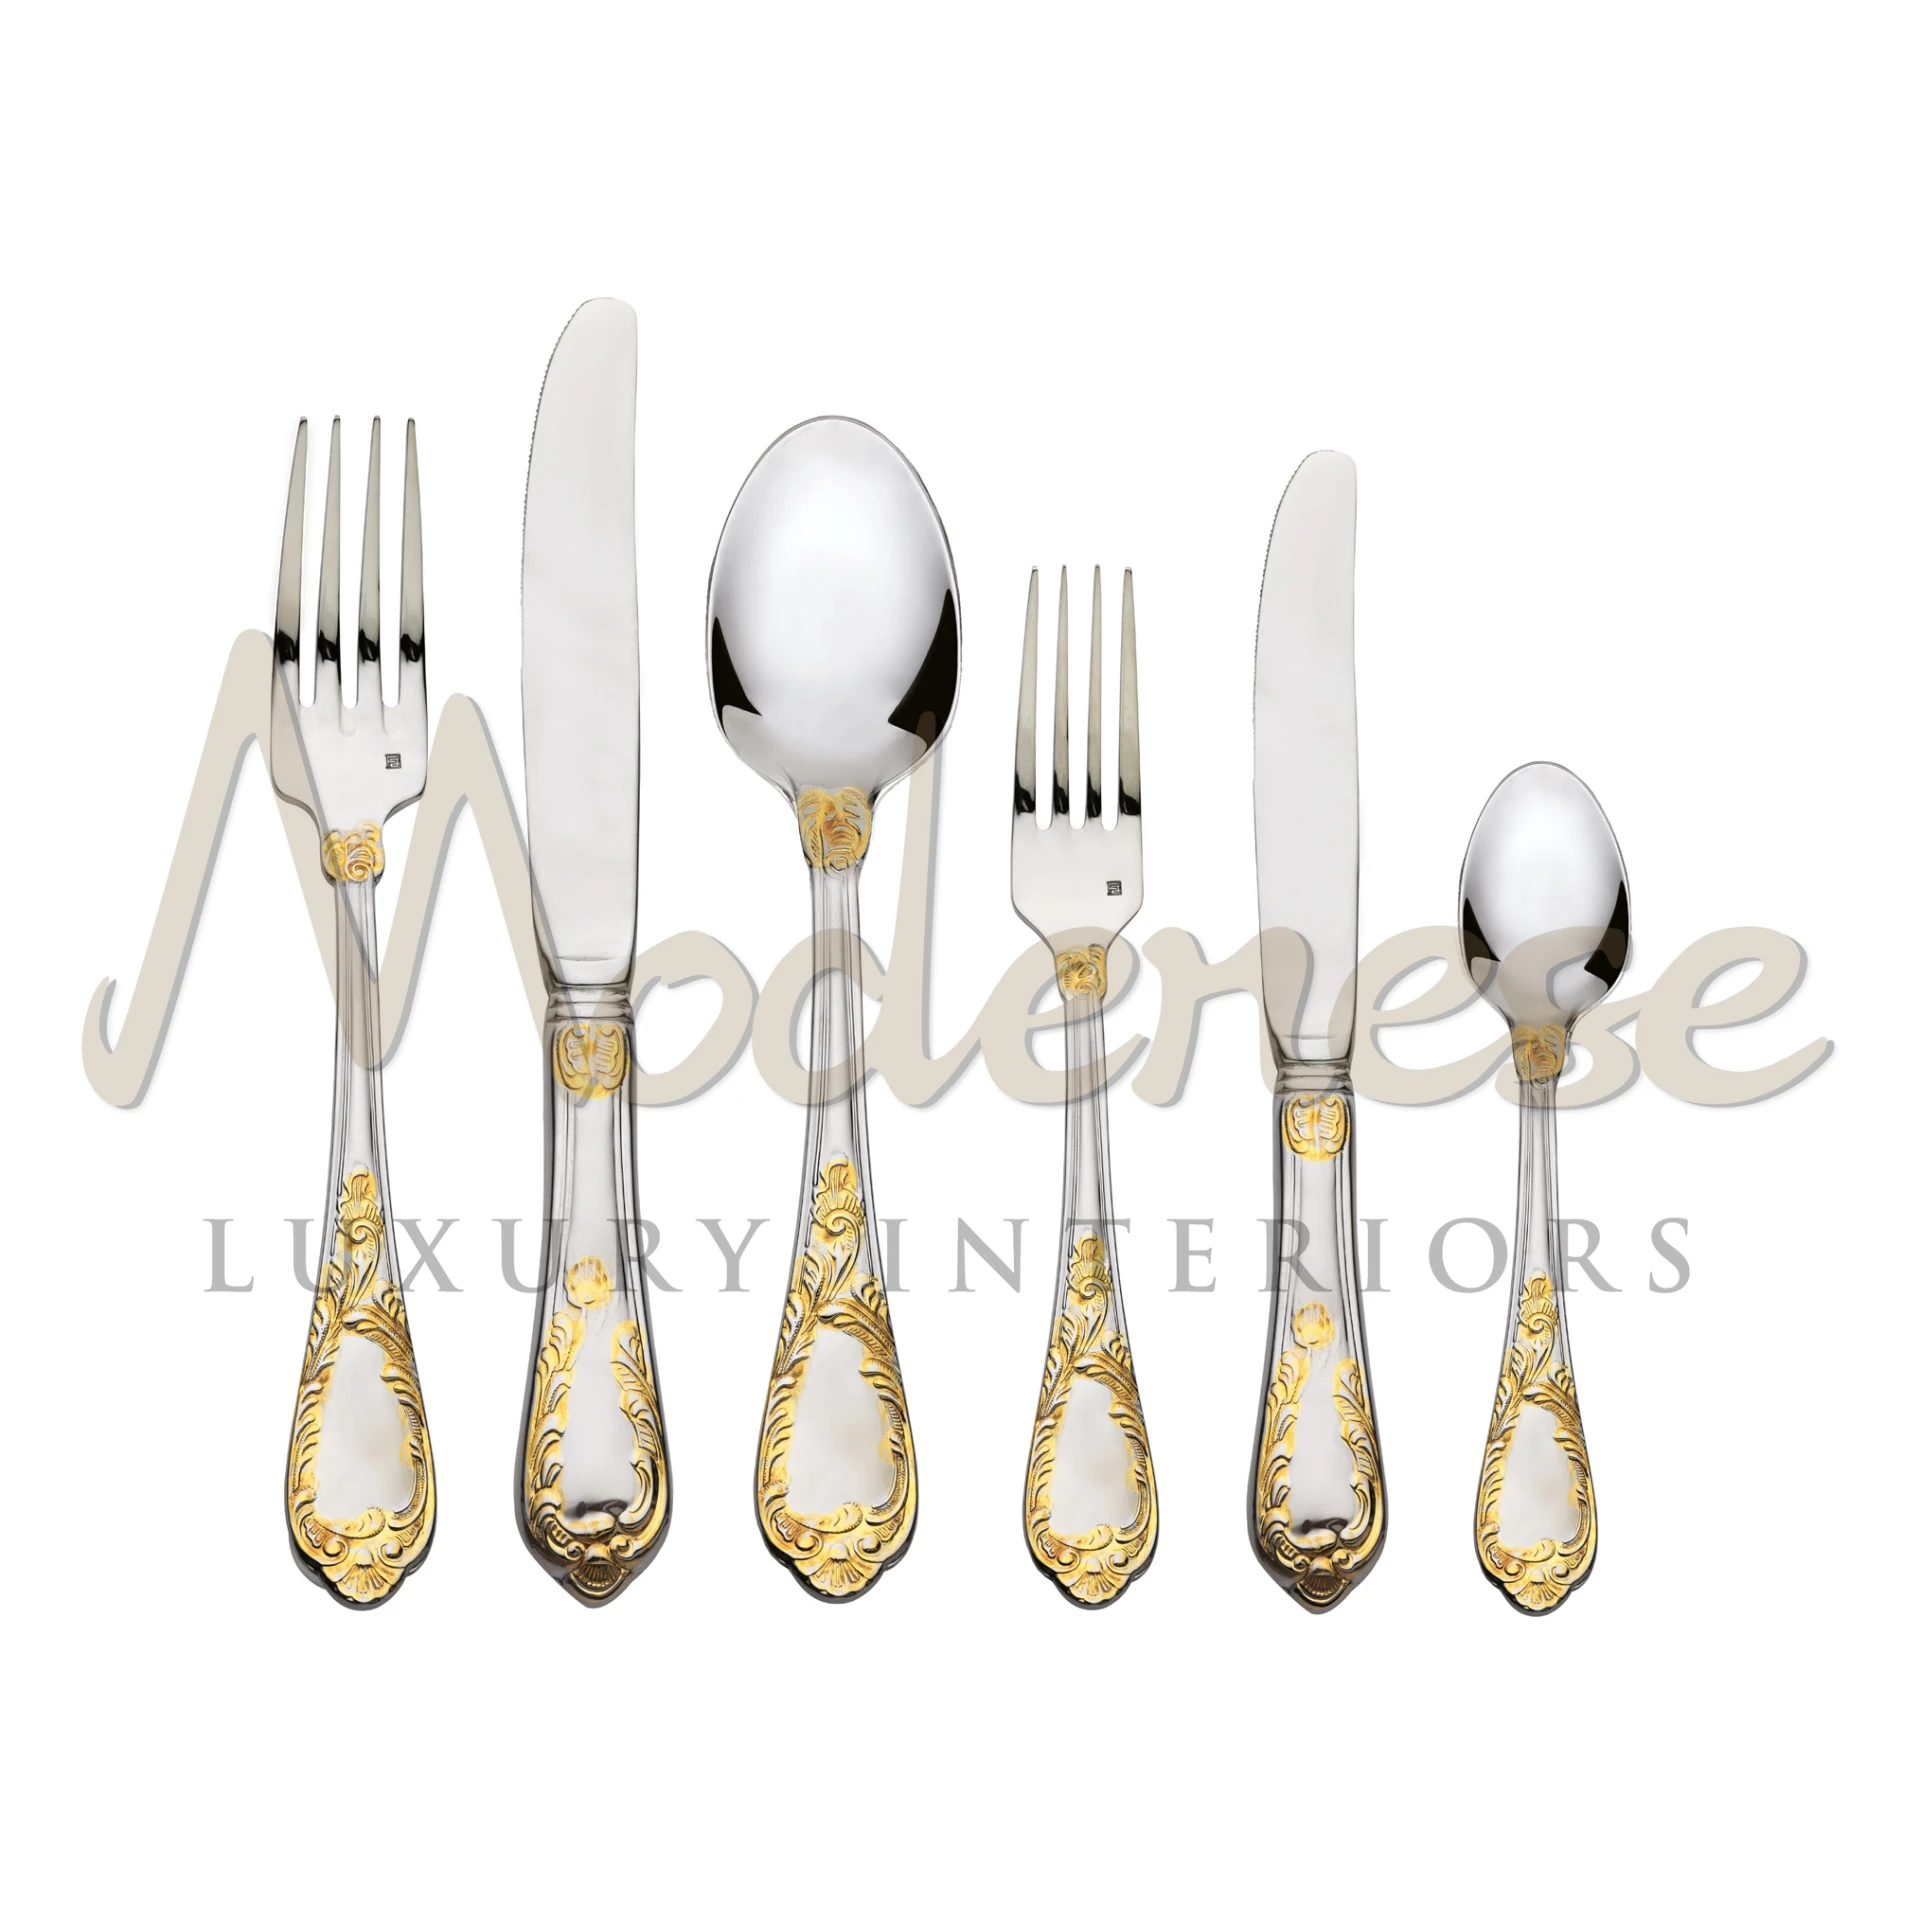 Luxurious 'Inox, Gold & Silver' tableware featuring a fusion of silver shine and gold accents